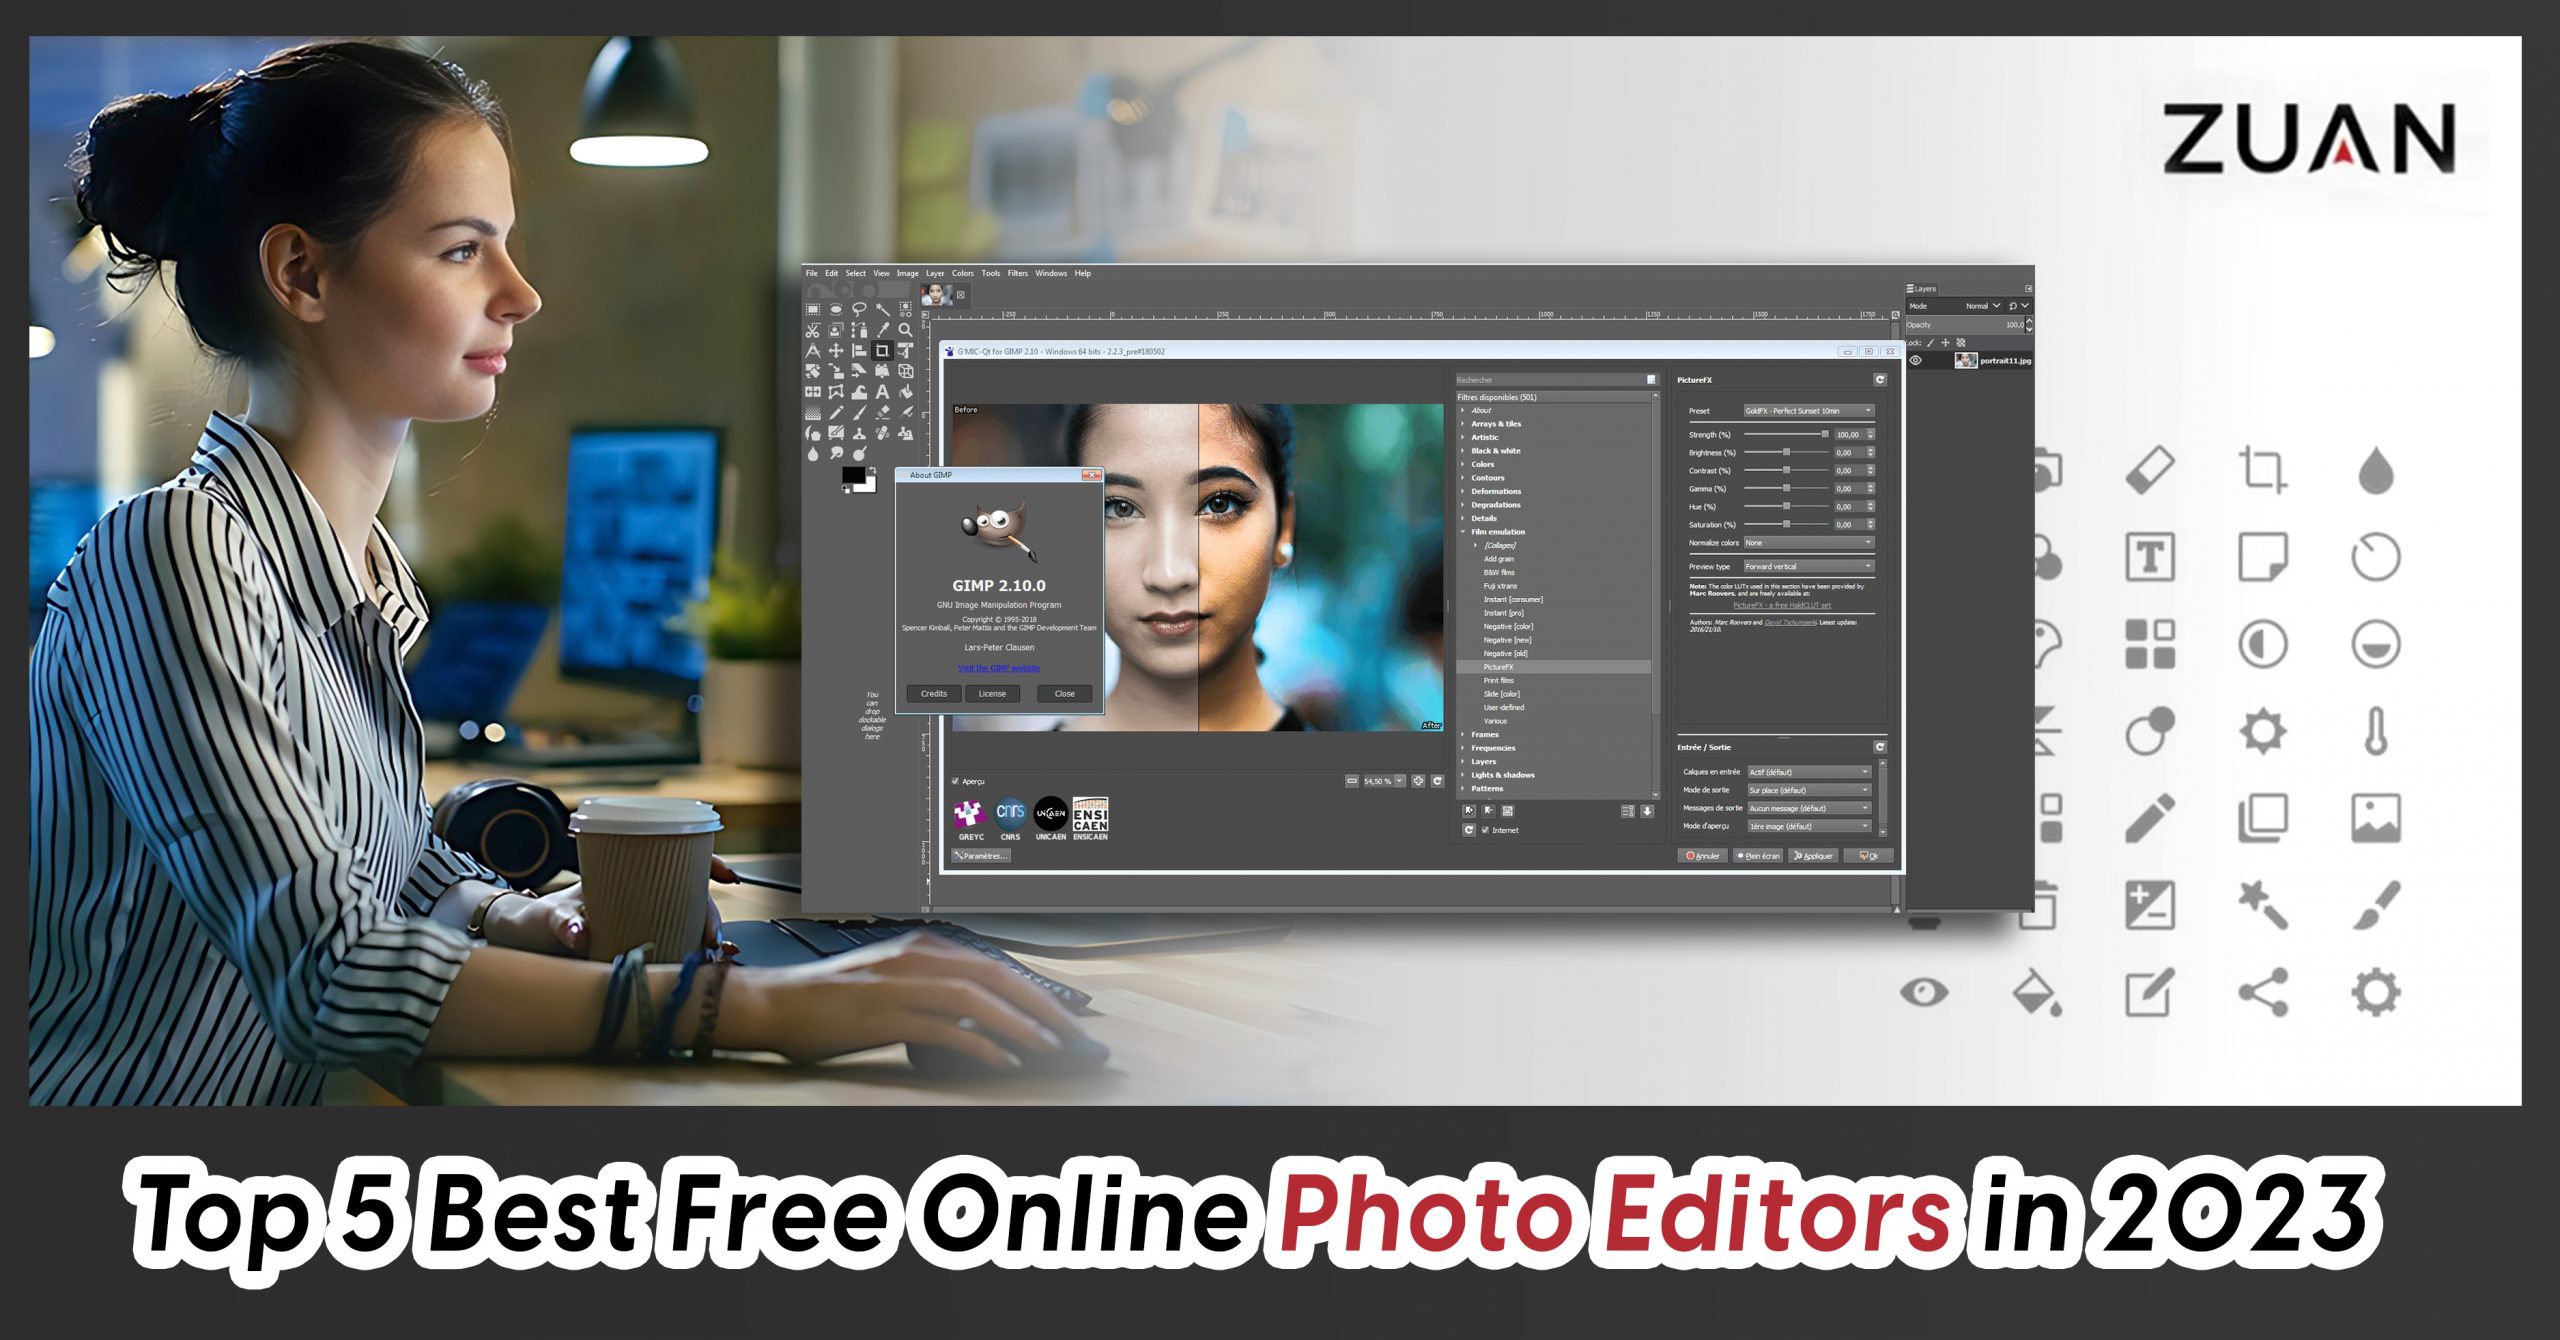 Top 5 free image editing tools for Windows